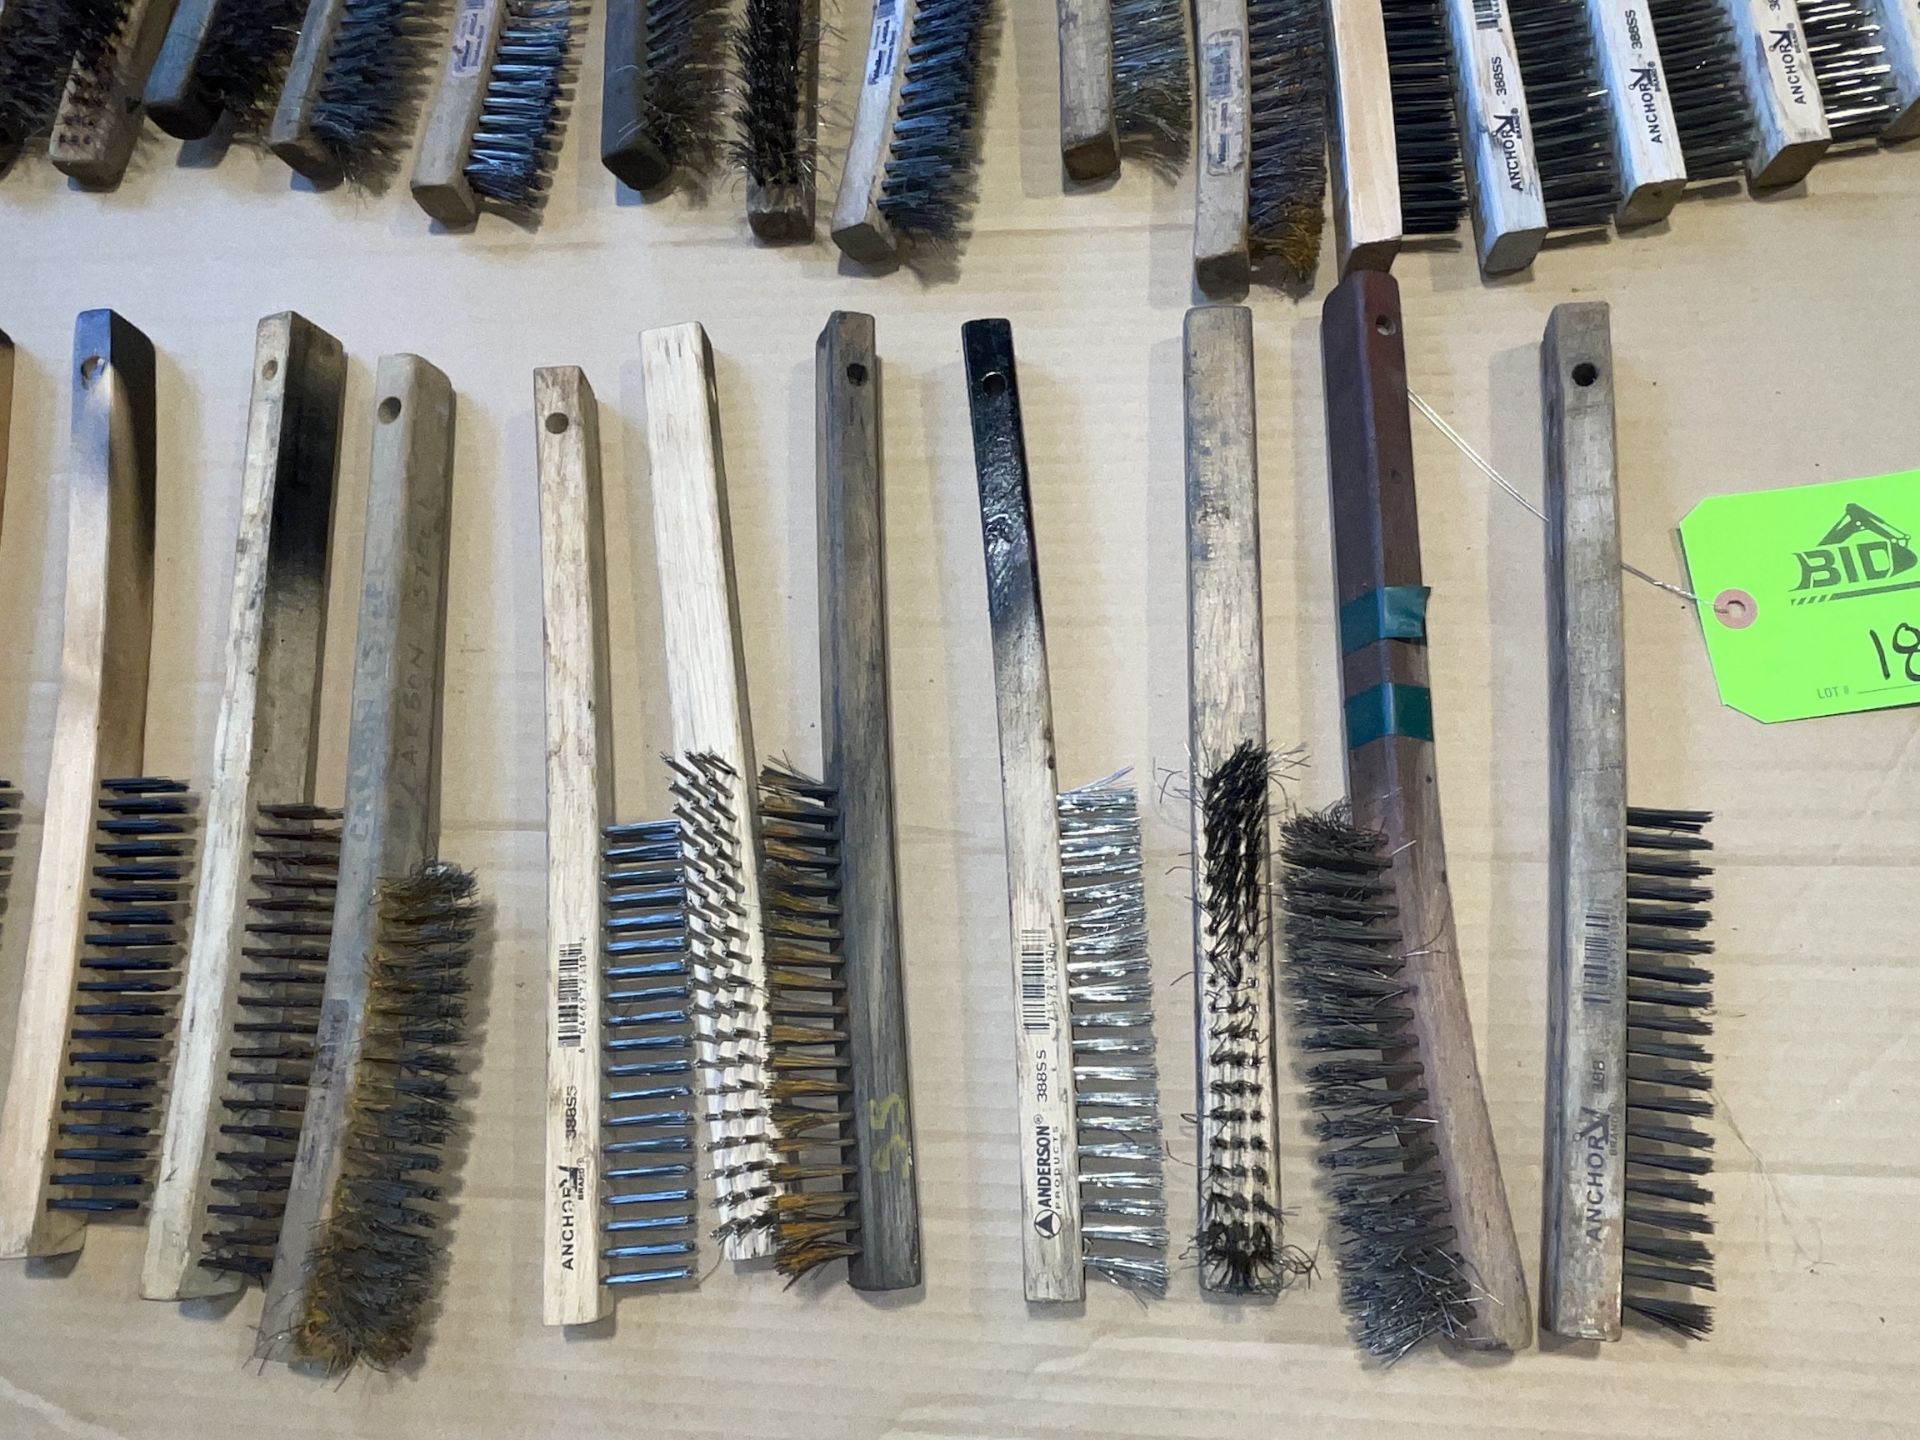 Lot of Stainless Steel Wire Brushes - Upland - Image 6 of 8